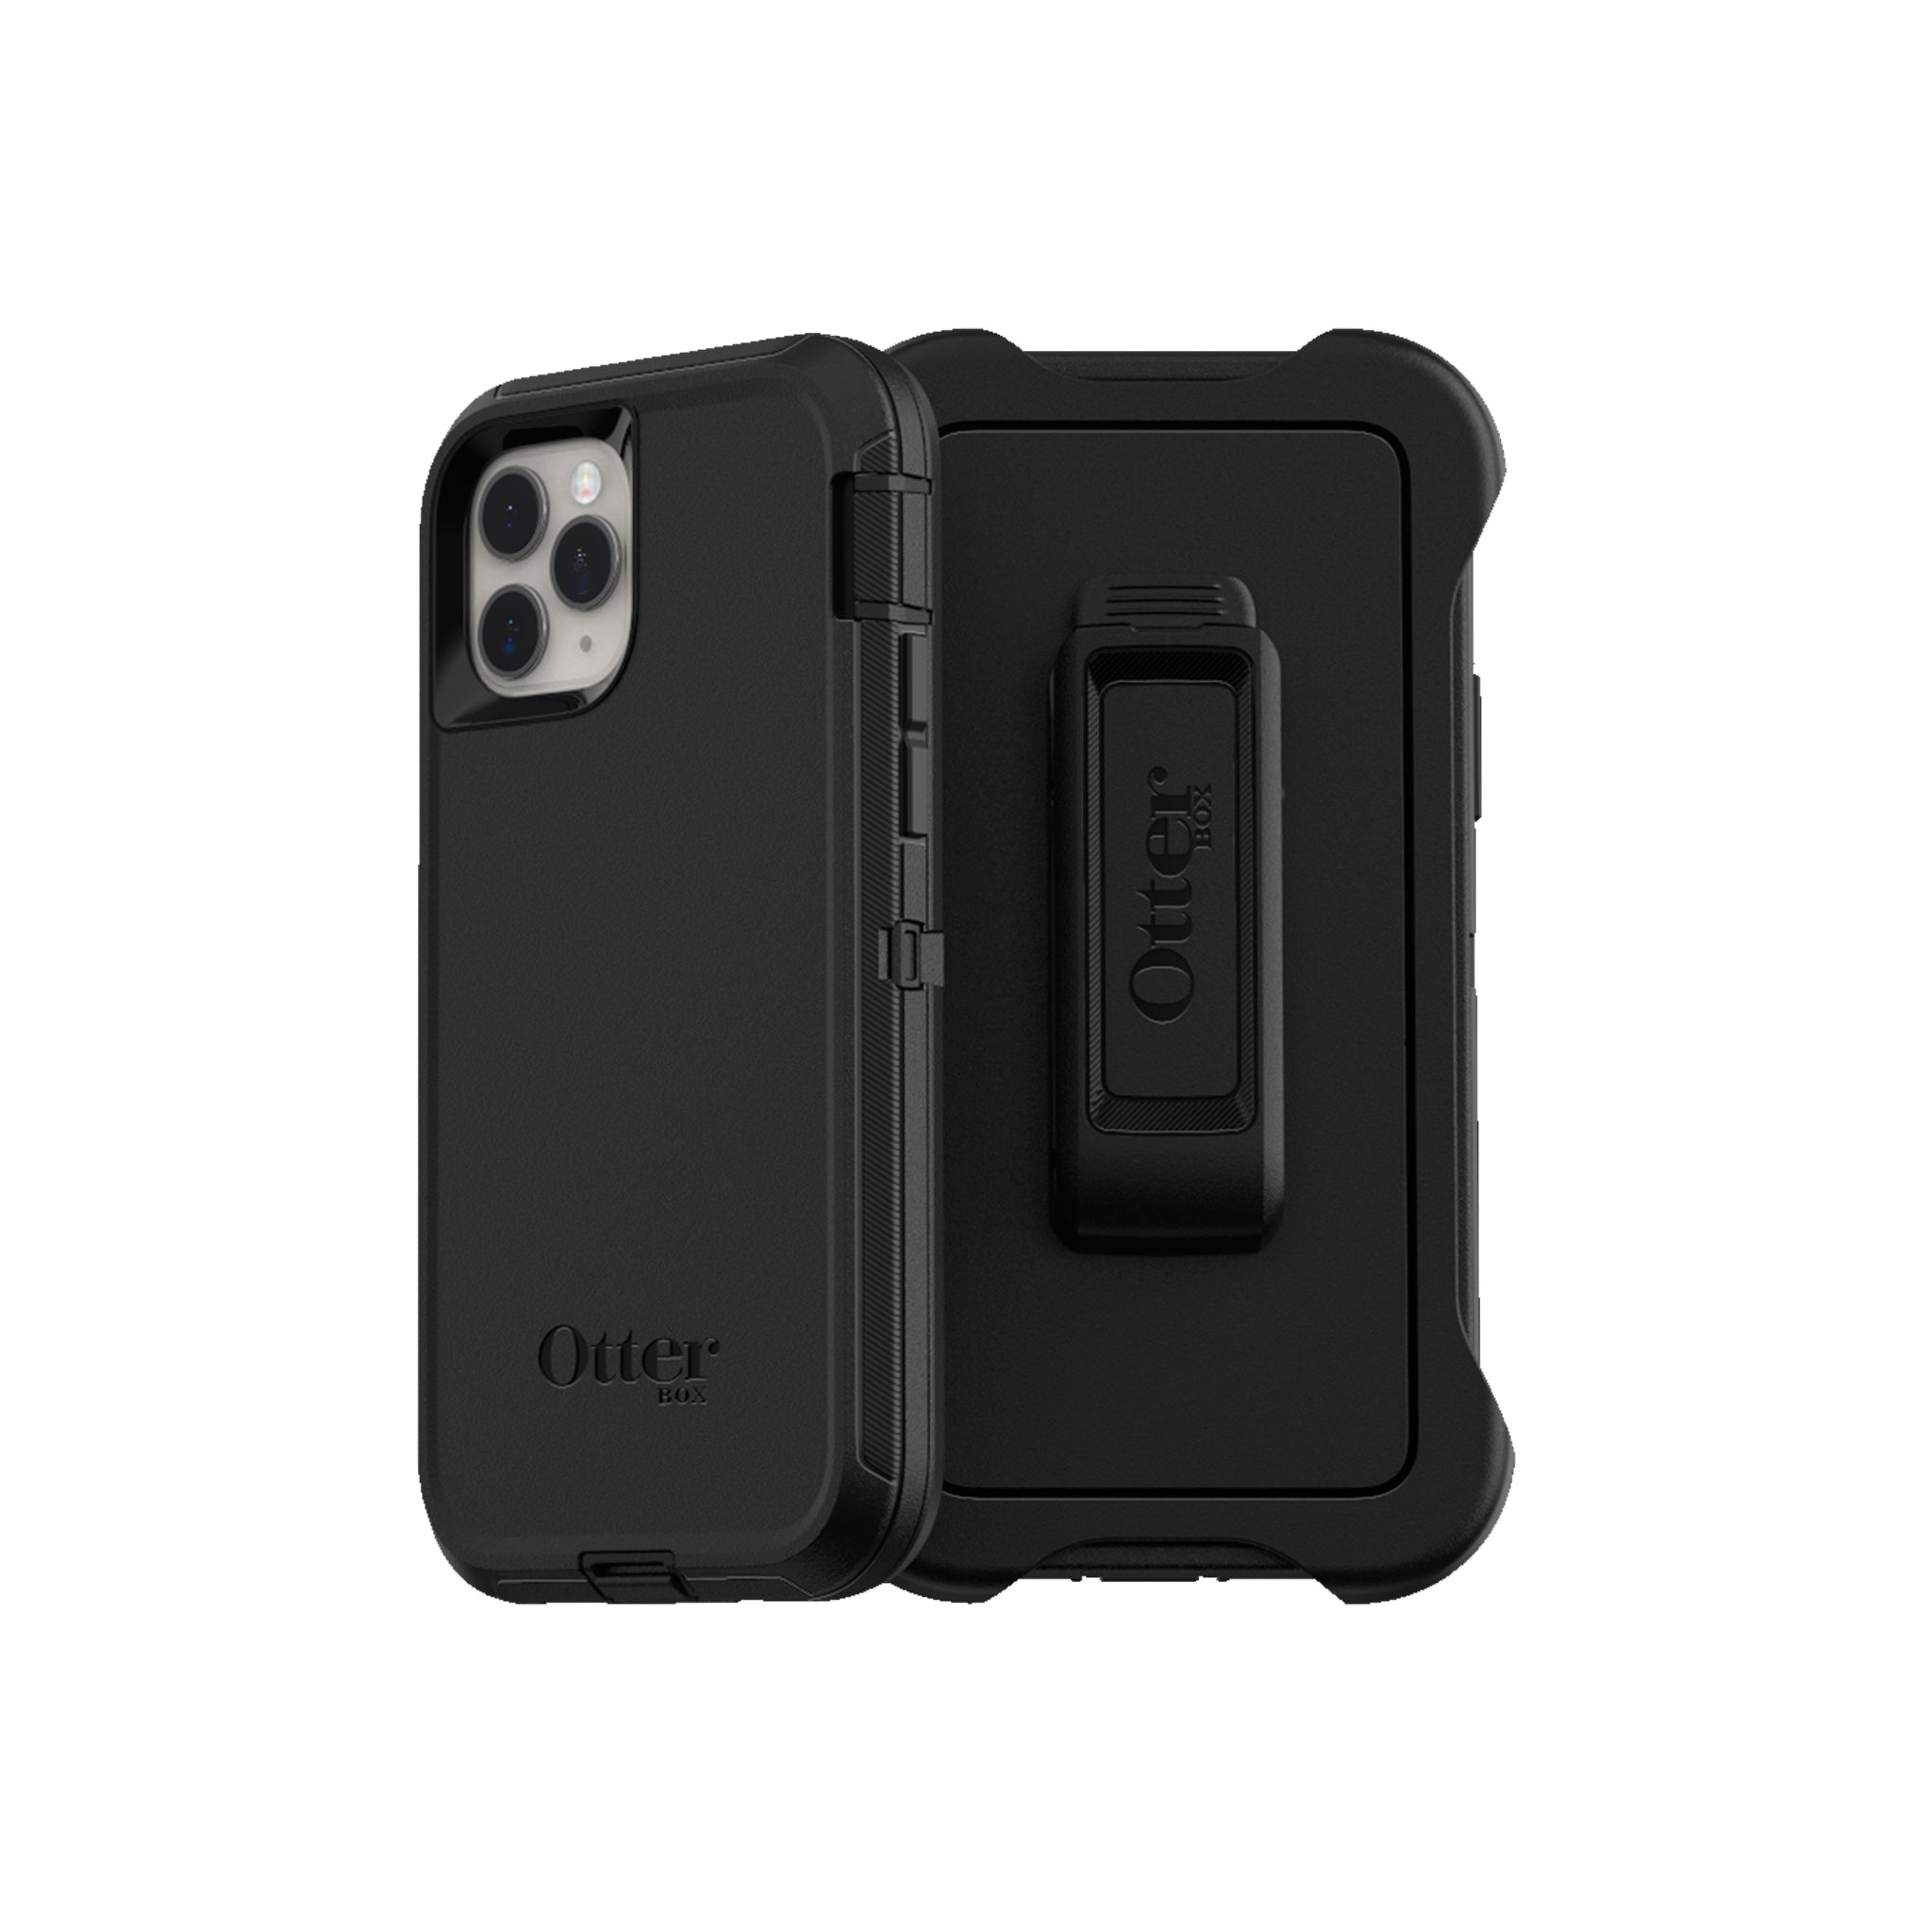 OtterBox - Defender Series Screenless Edition Case for iPhone 11 Pro - Black